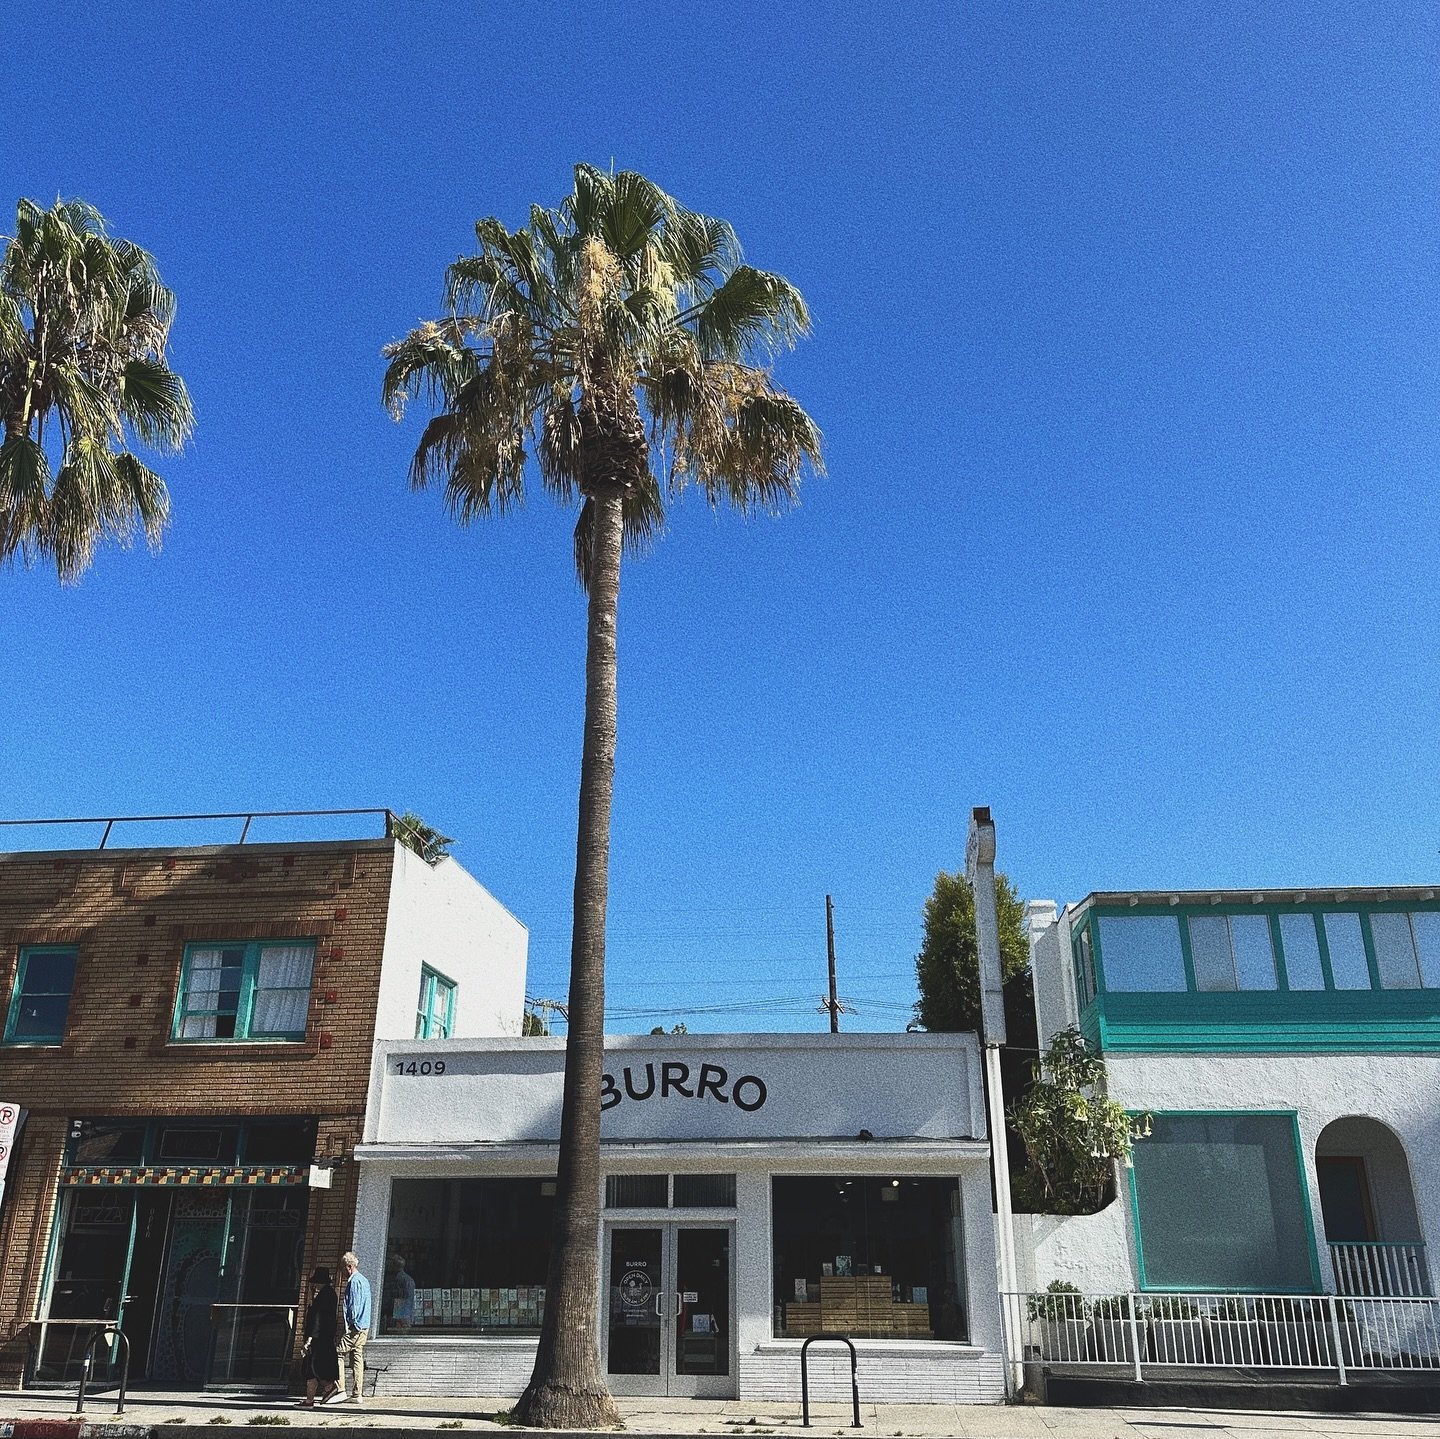 Congrats to @burrogoods who celebrated its 25th anniversary this month! Since 1999, this charming lifestyle shop has been a Venice staple for paper goods, candles, homeware, jewelry and everything in between!
.
.
(📷: @burrogoods ) @erinnberkson #bur